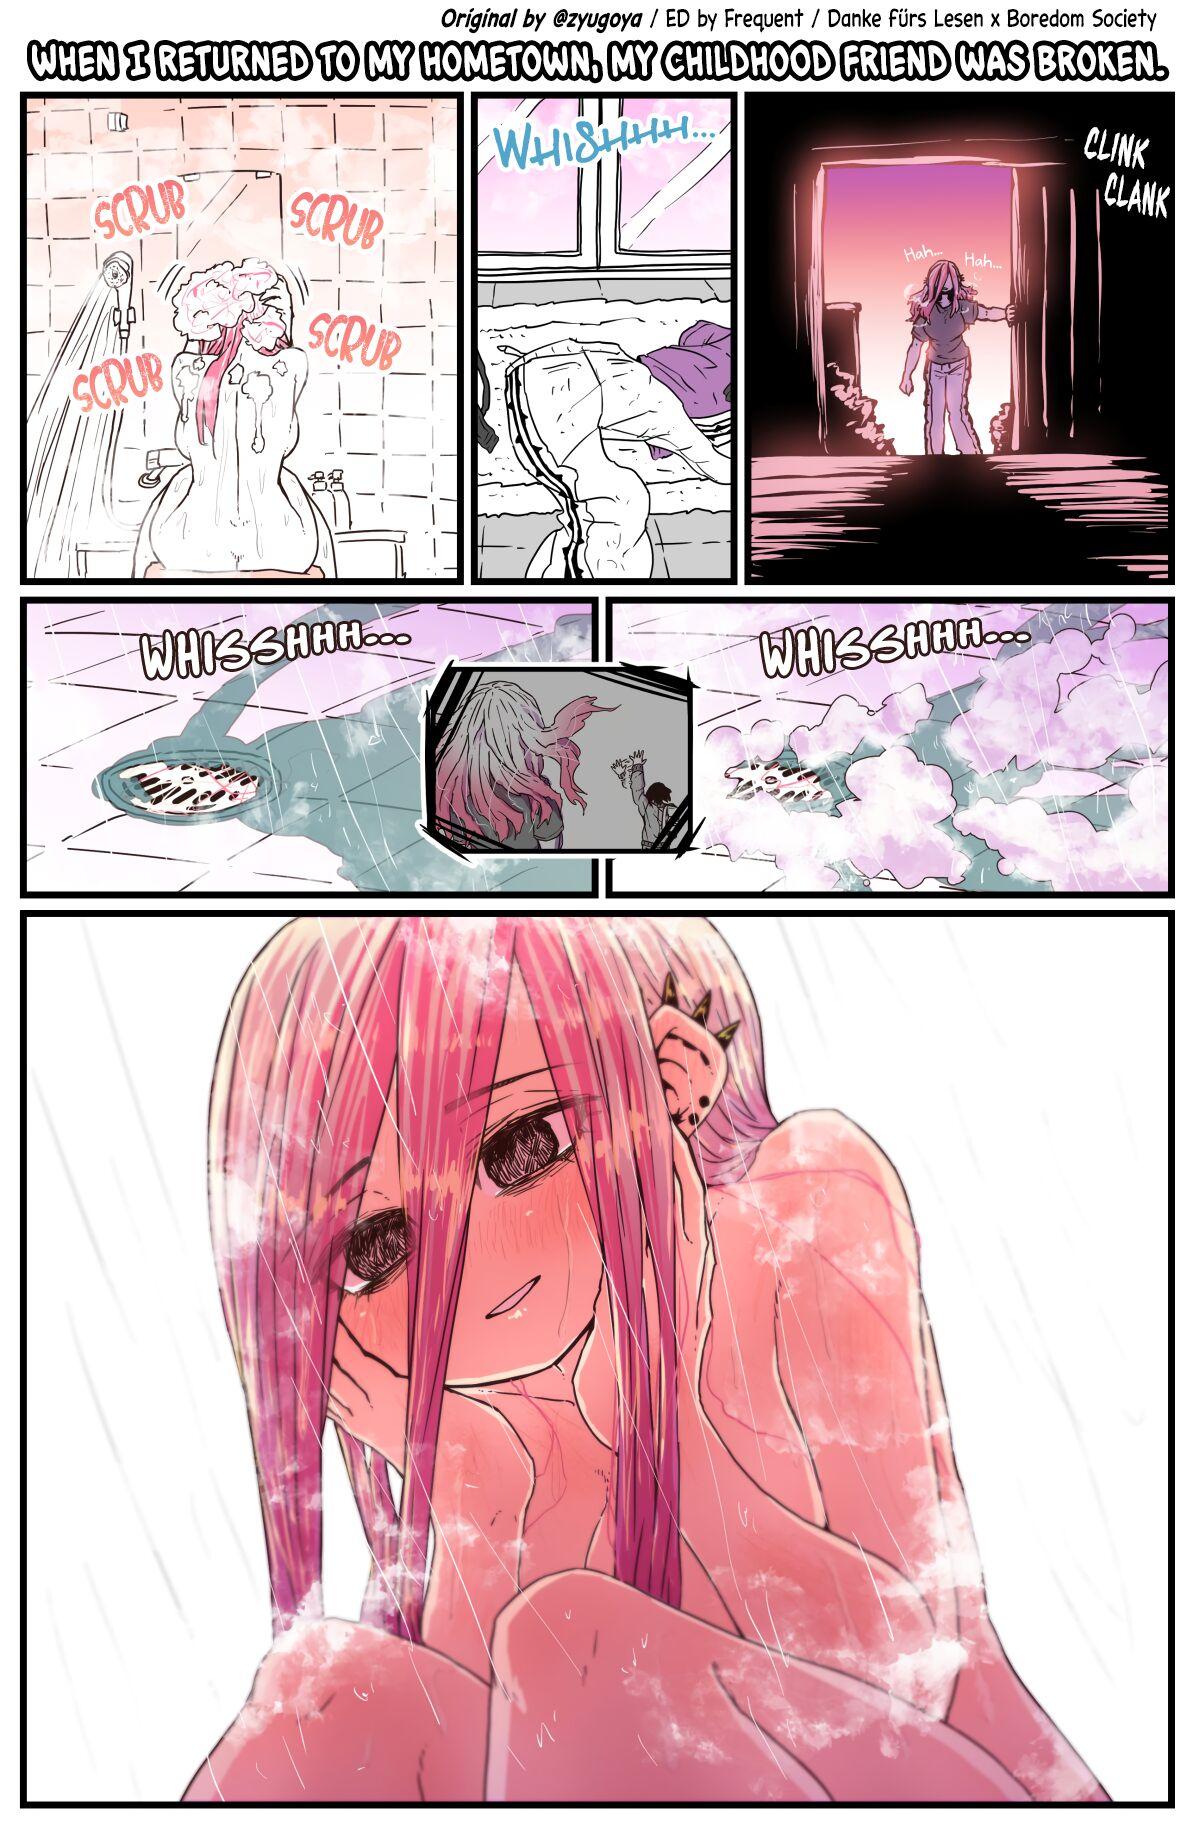 Mmf When I Returned to My Hometown, My Childhood Friend was Broken - Original Amatoriale - Page 6